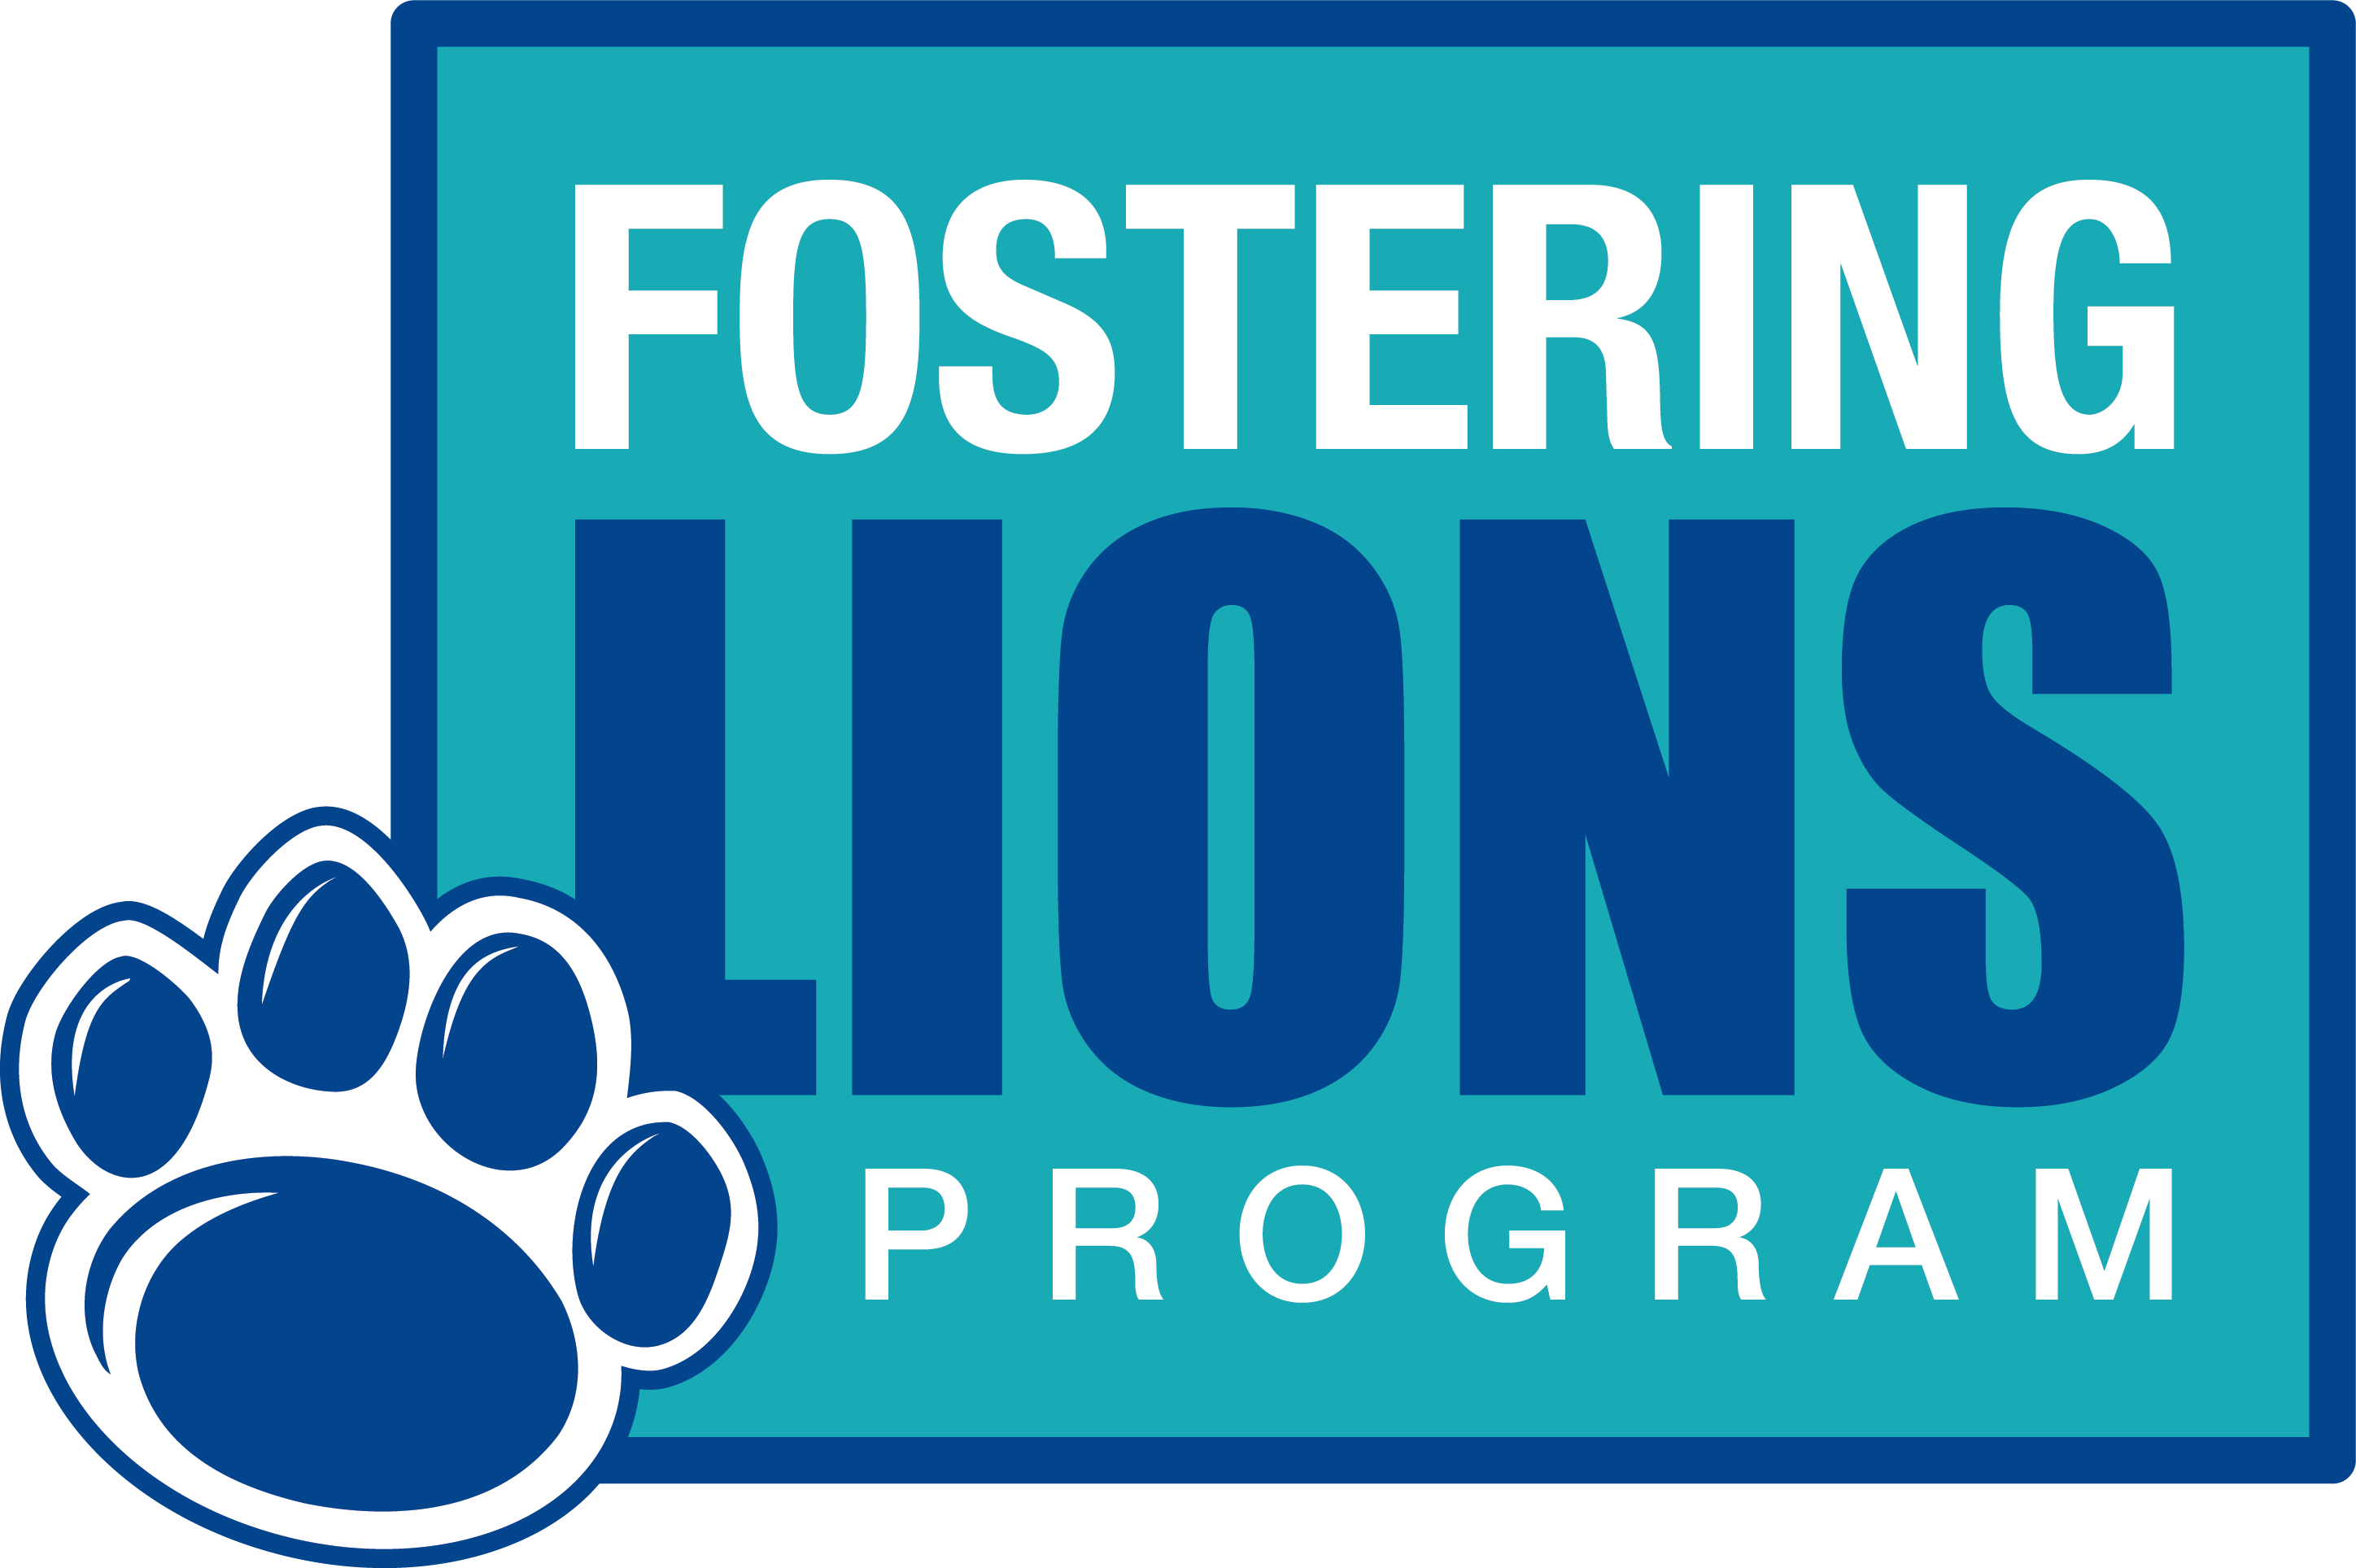 Fostering Lions logo with blue paw print on teal background